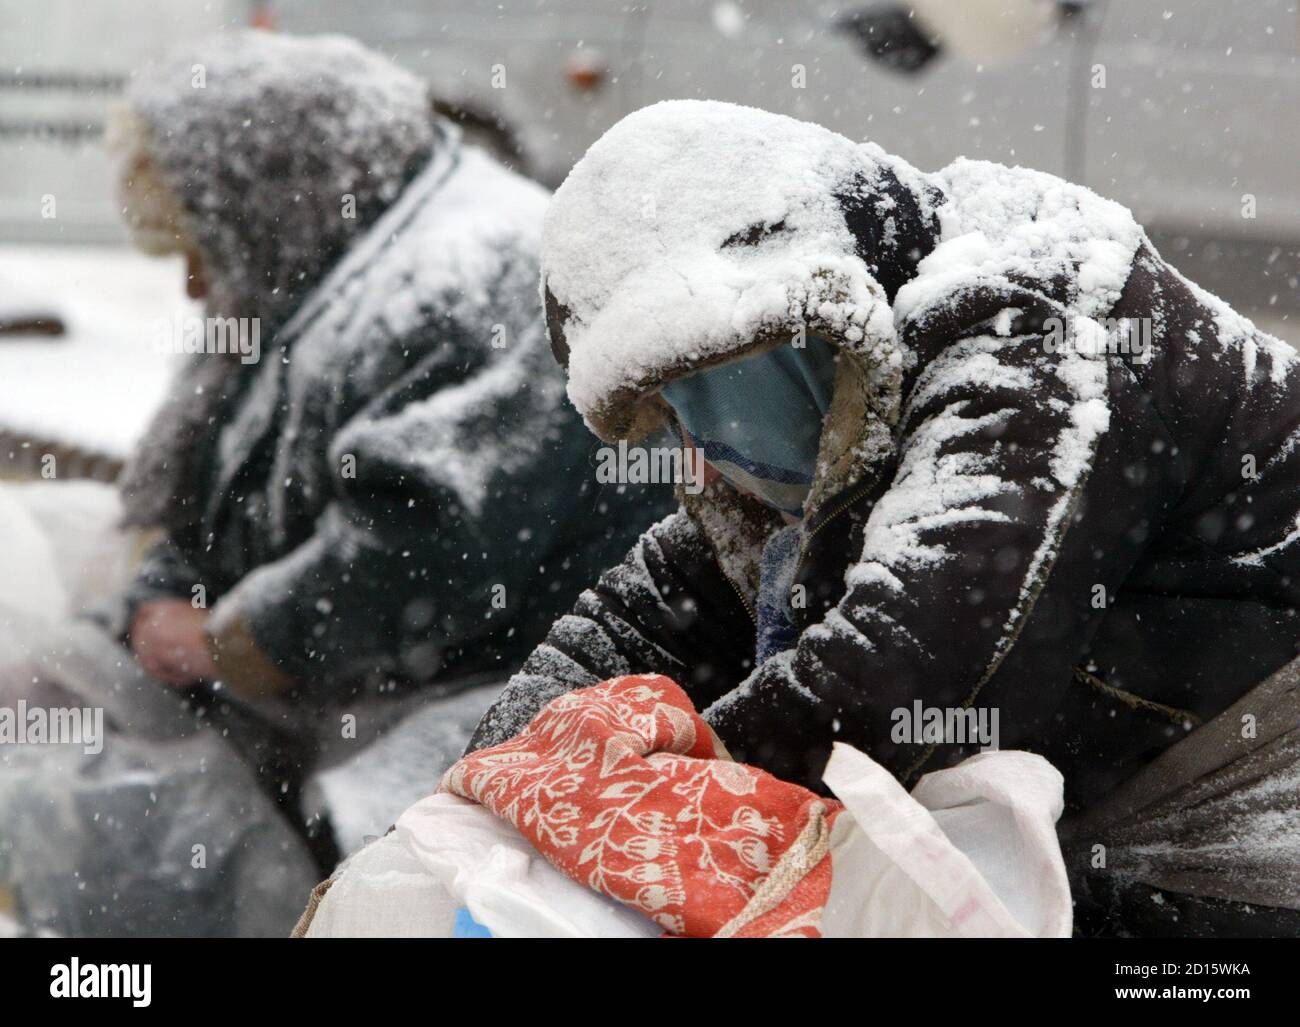 Street vendors sit in the street of Russia's southern city of Stavropol  during a heavy snowfall, February 7, 2006.Temperature in Stavropol region  dropped to minus 11 degrees Celsius (12.2 Fahrenheit) on Tuesday.